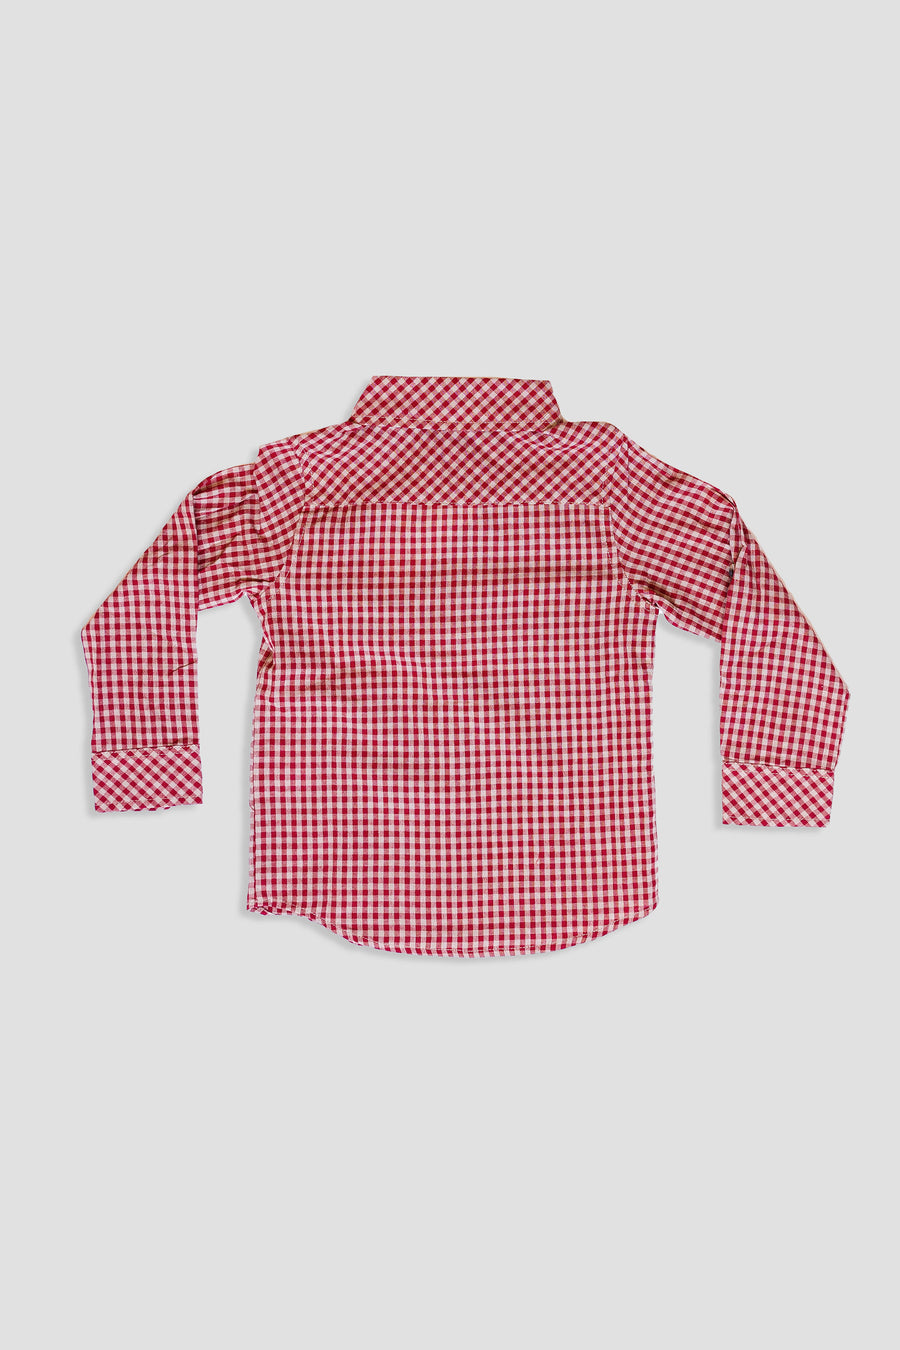 Cooper Top Aspen Red Check *Limited*Edition*